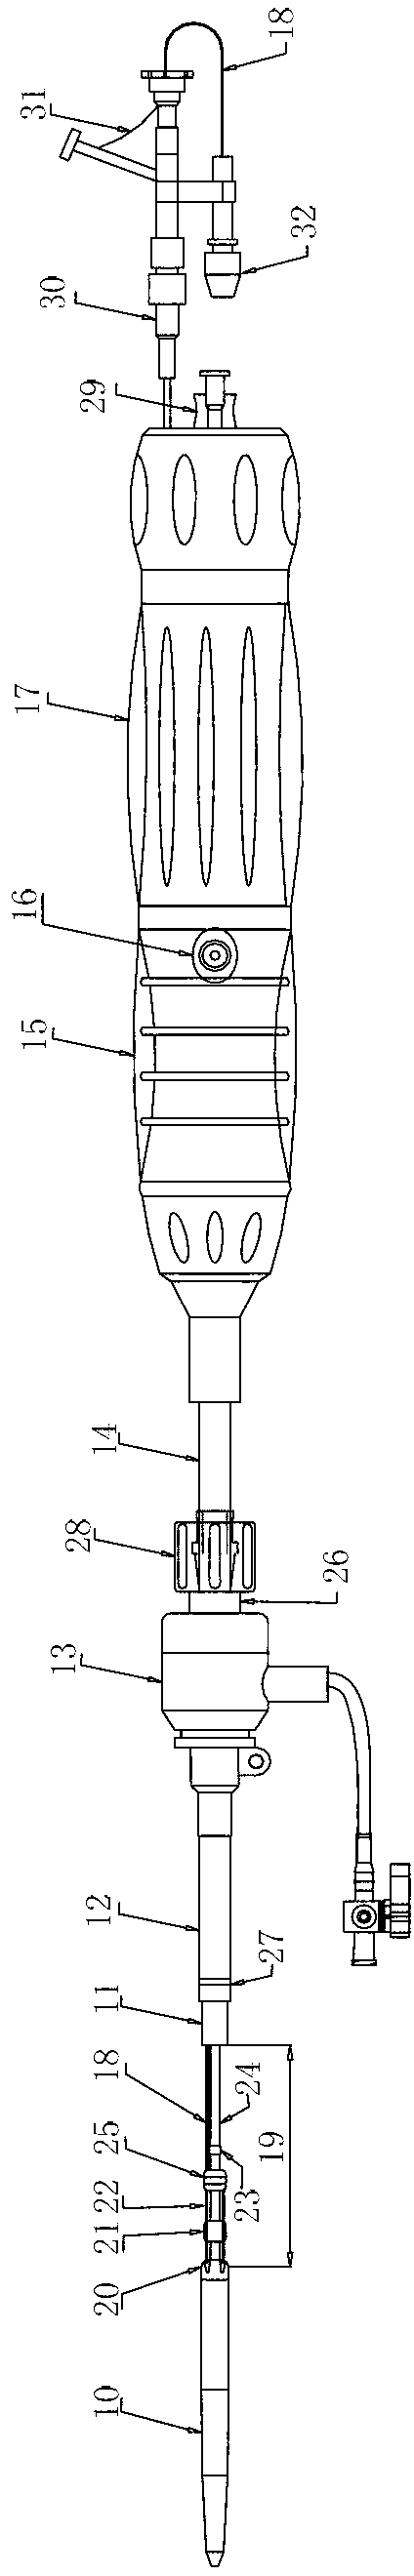 Thoracic aortic aneurysm coated stent and thoracic aortic aneurysm minimally invasive treatment system